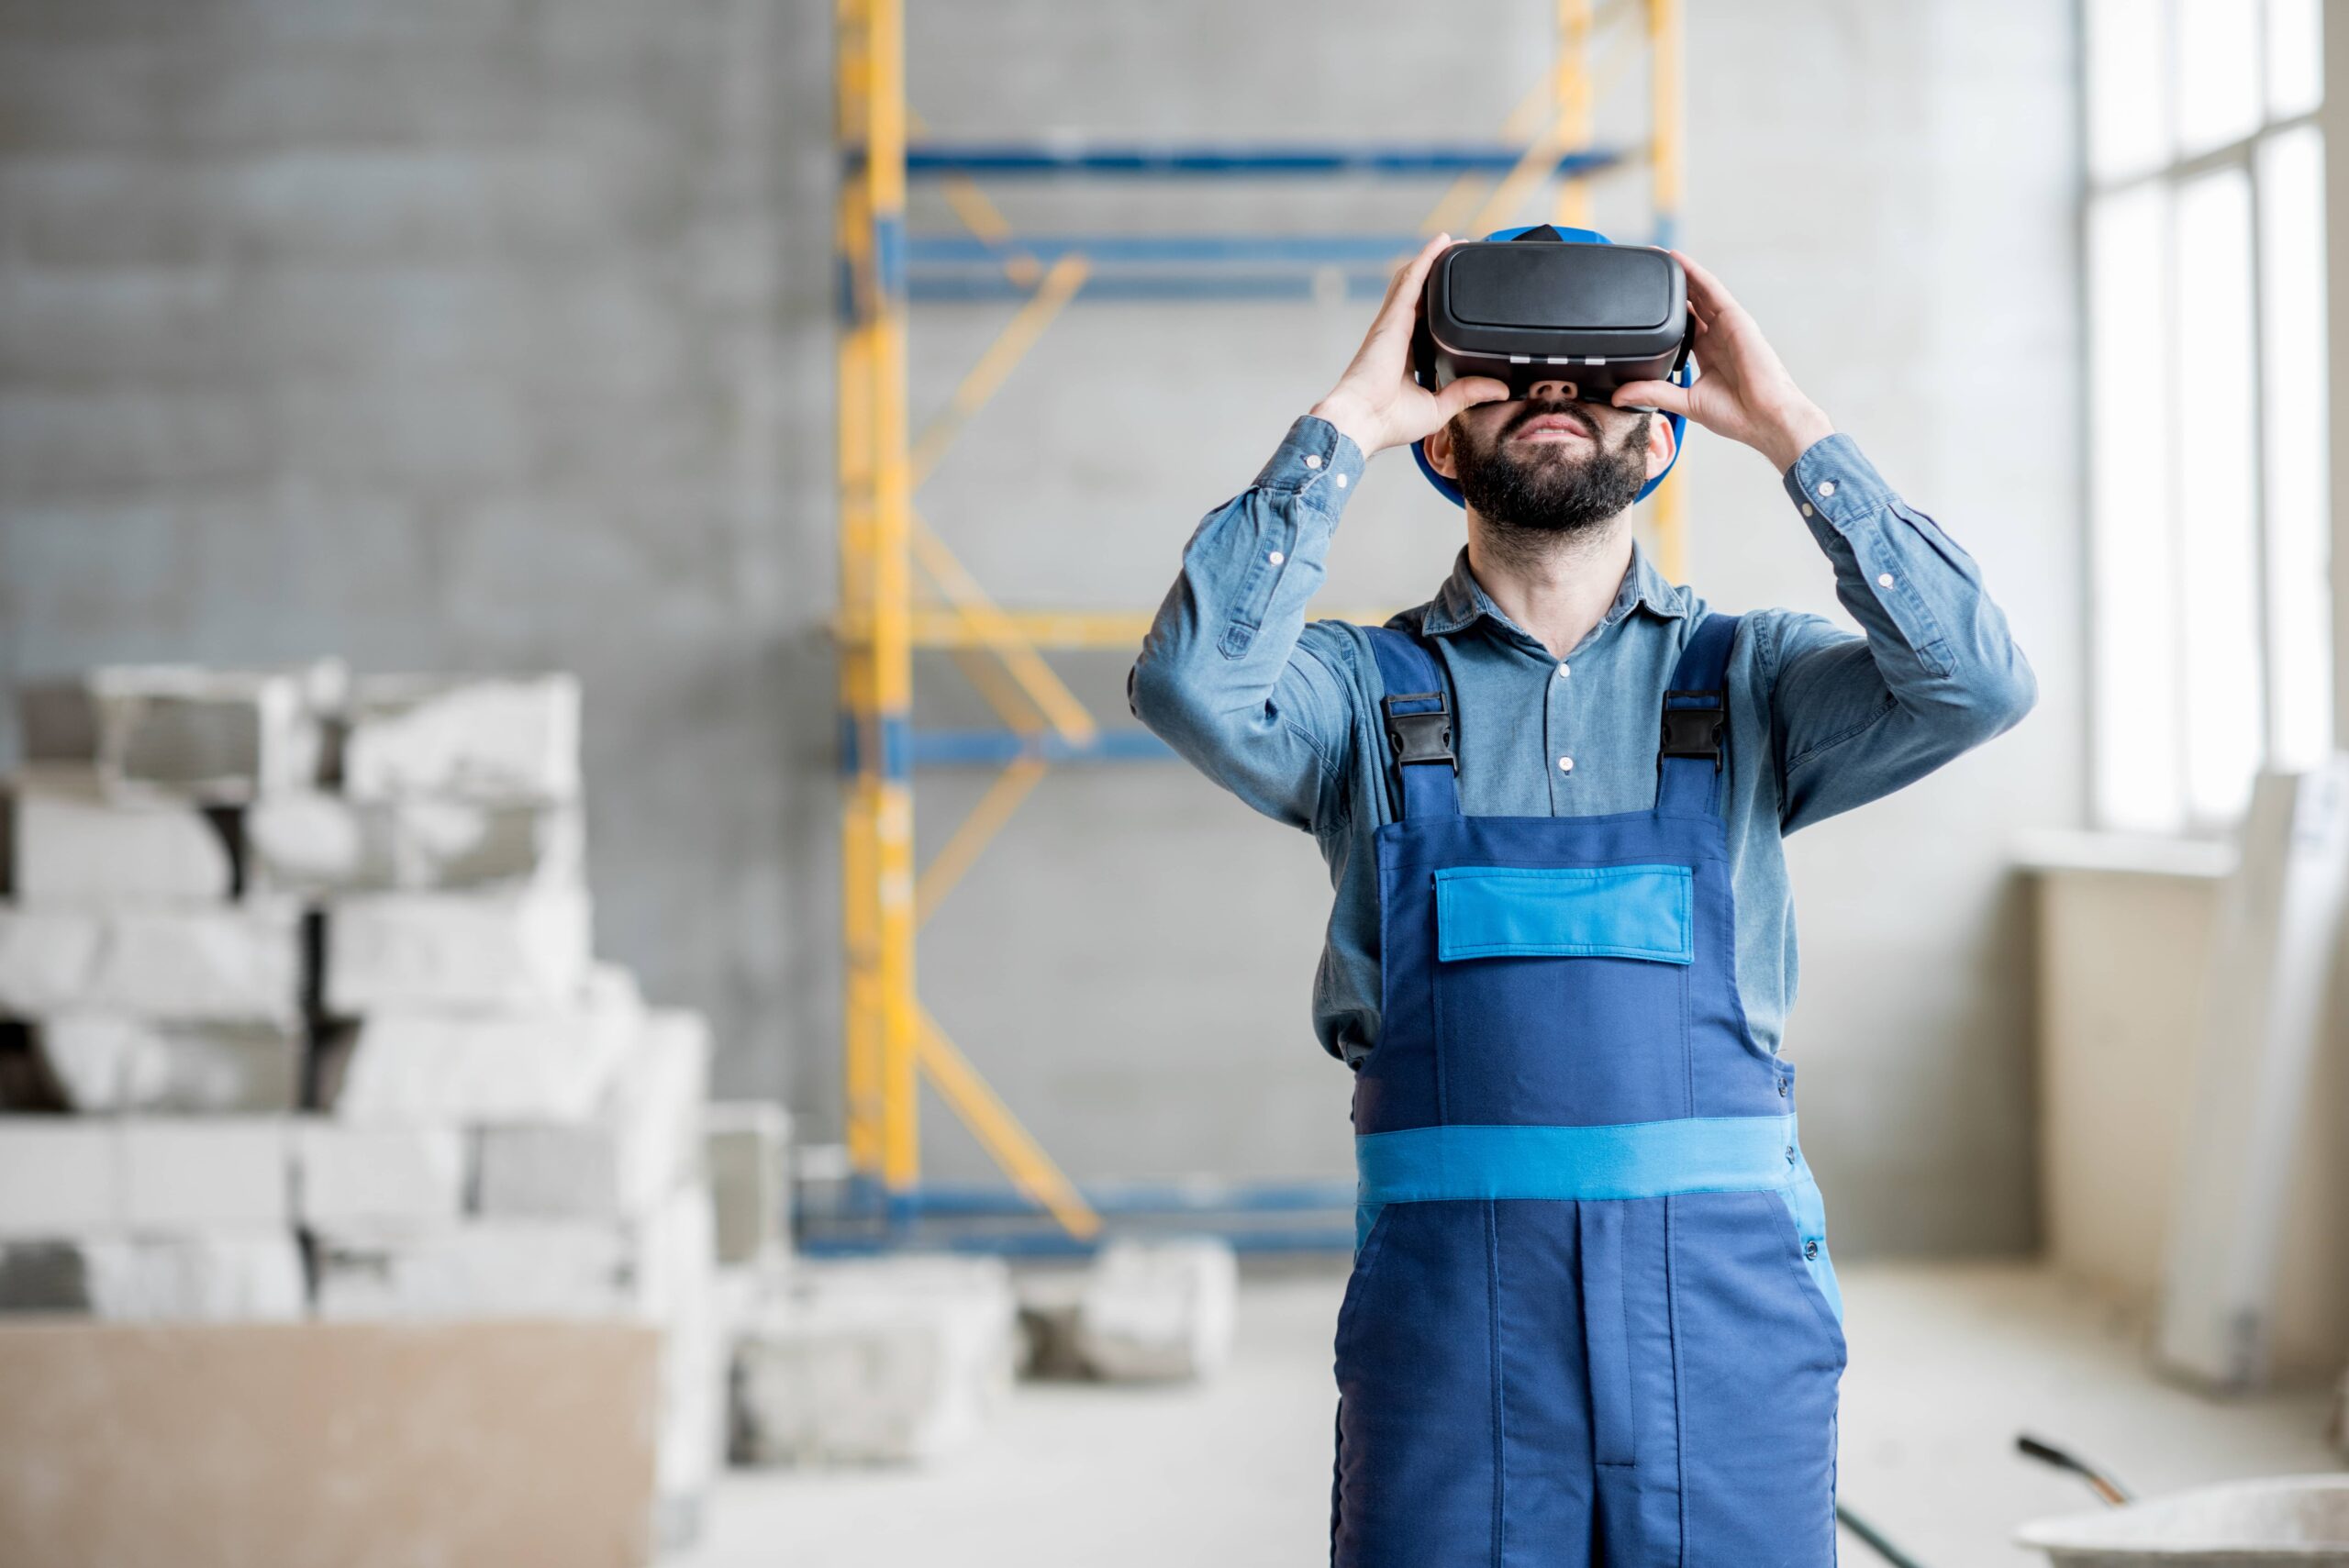 Training for the industry in Virtual Reality